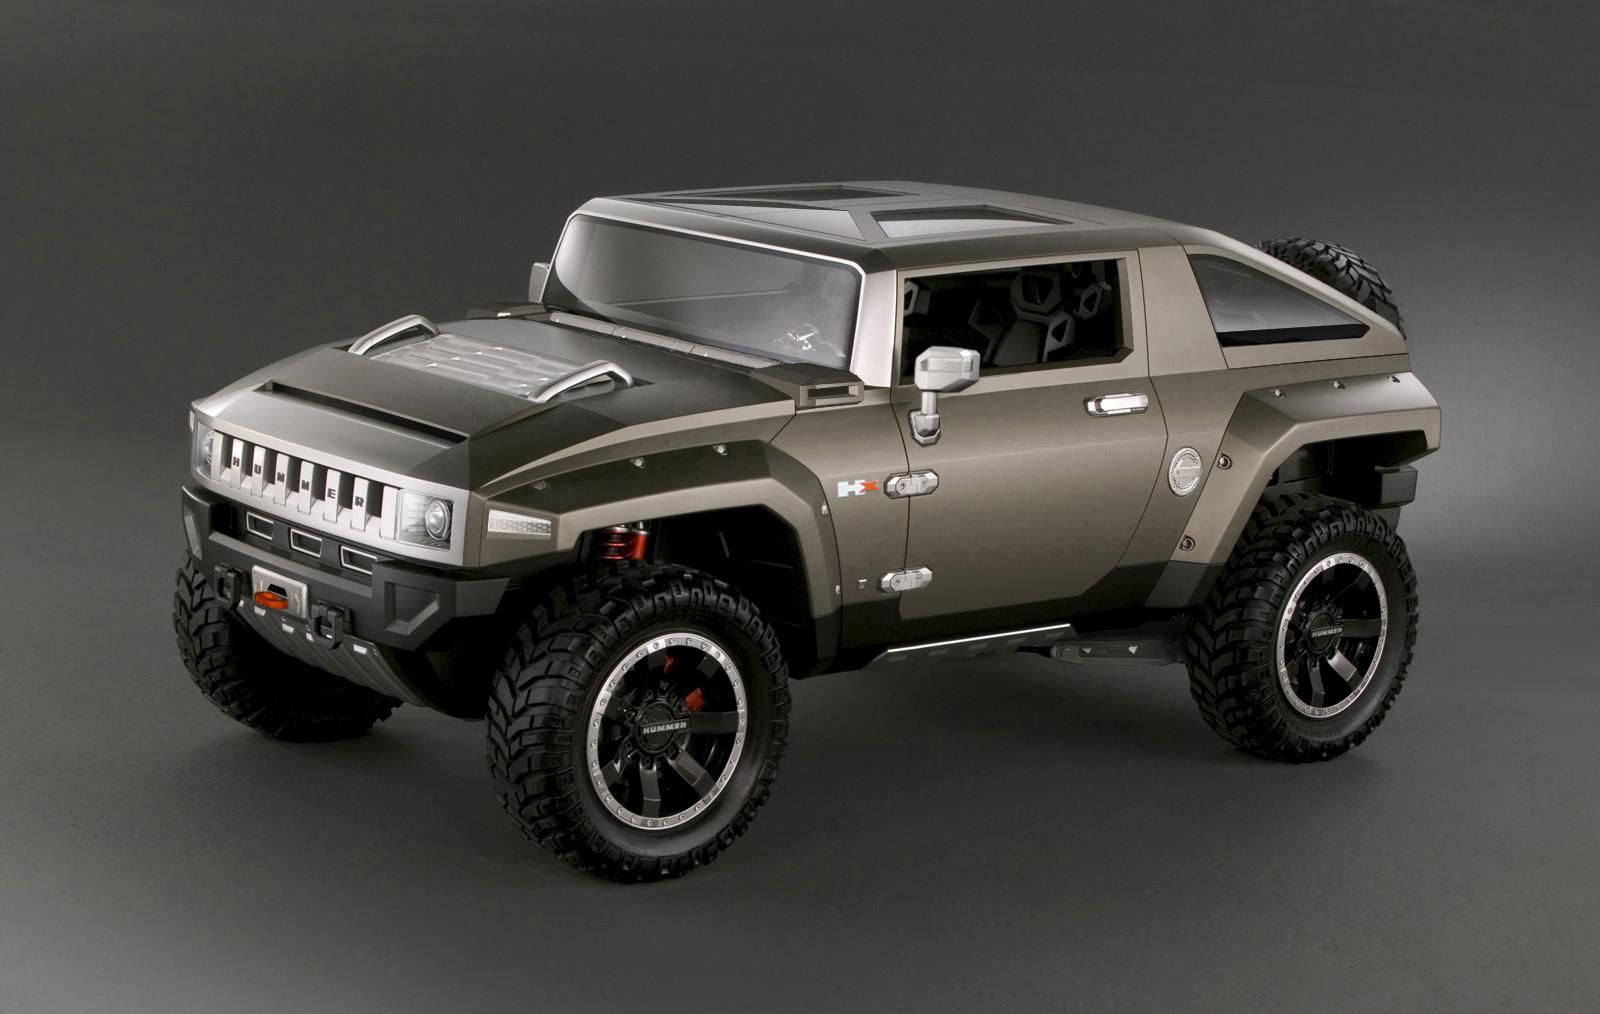 Hummer HX concept from 2008 on neutral background